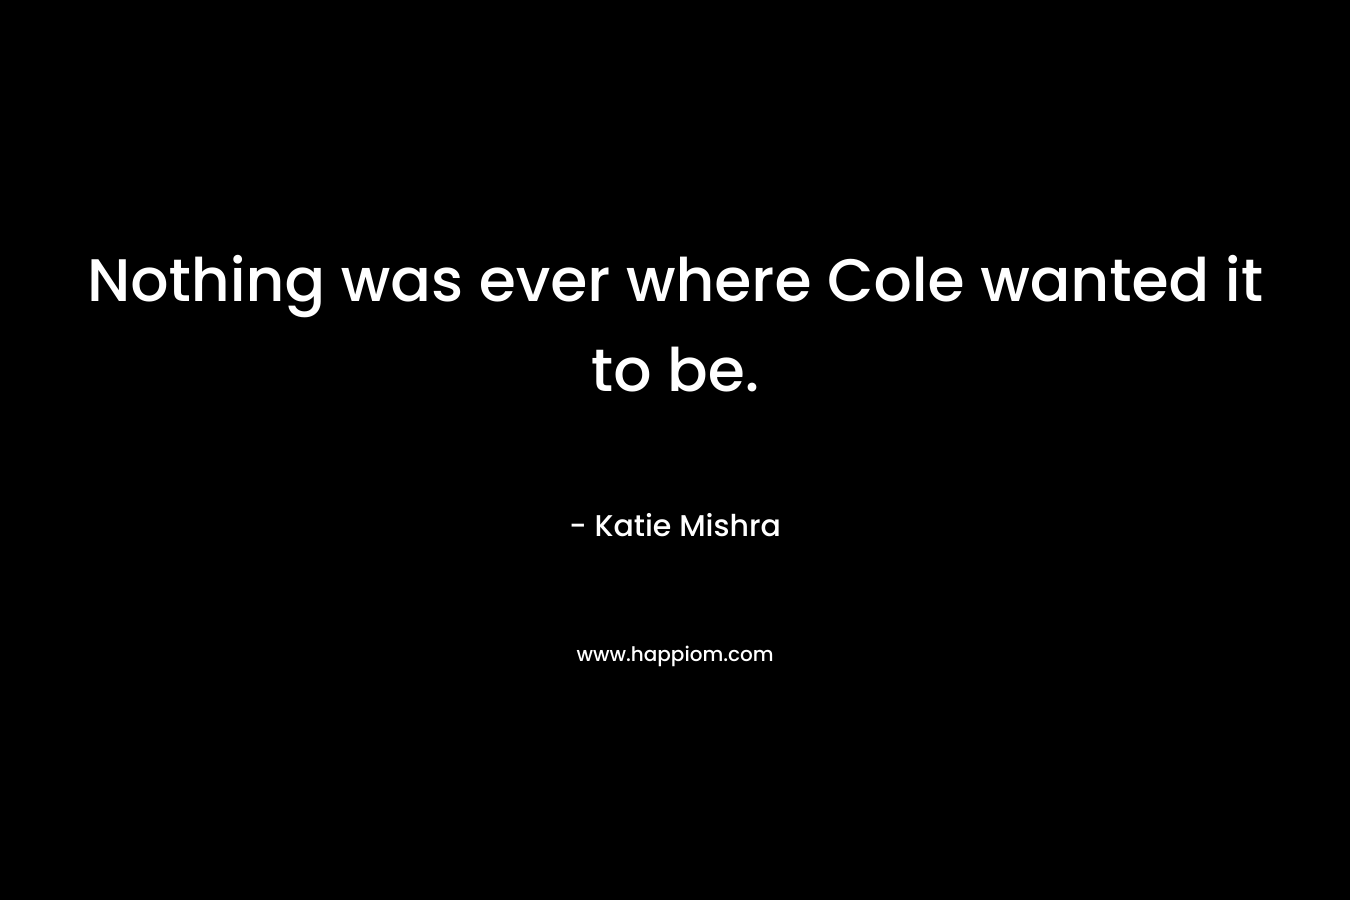 Nothing was ever where Cole wanted it to be.